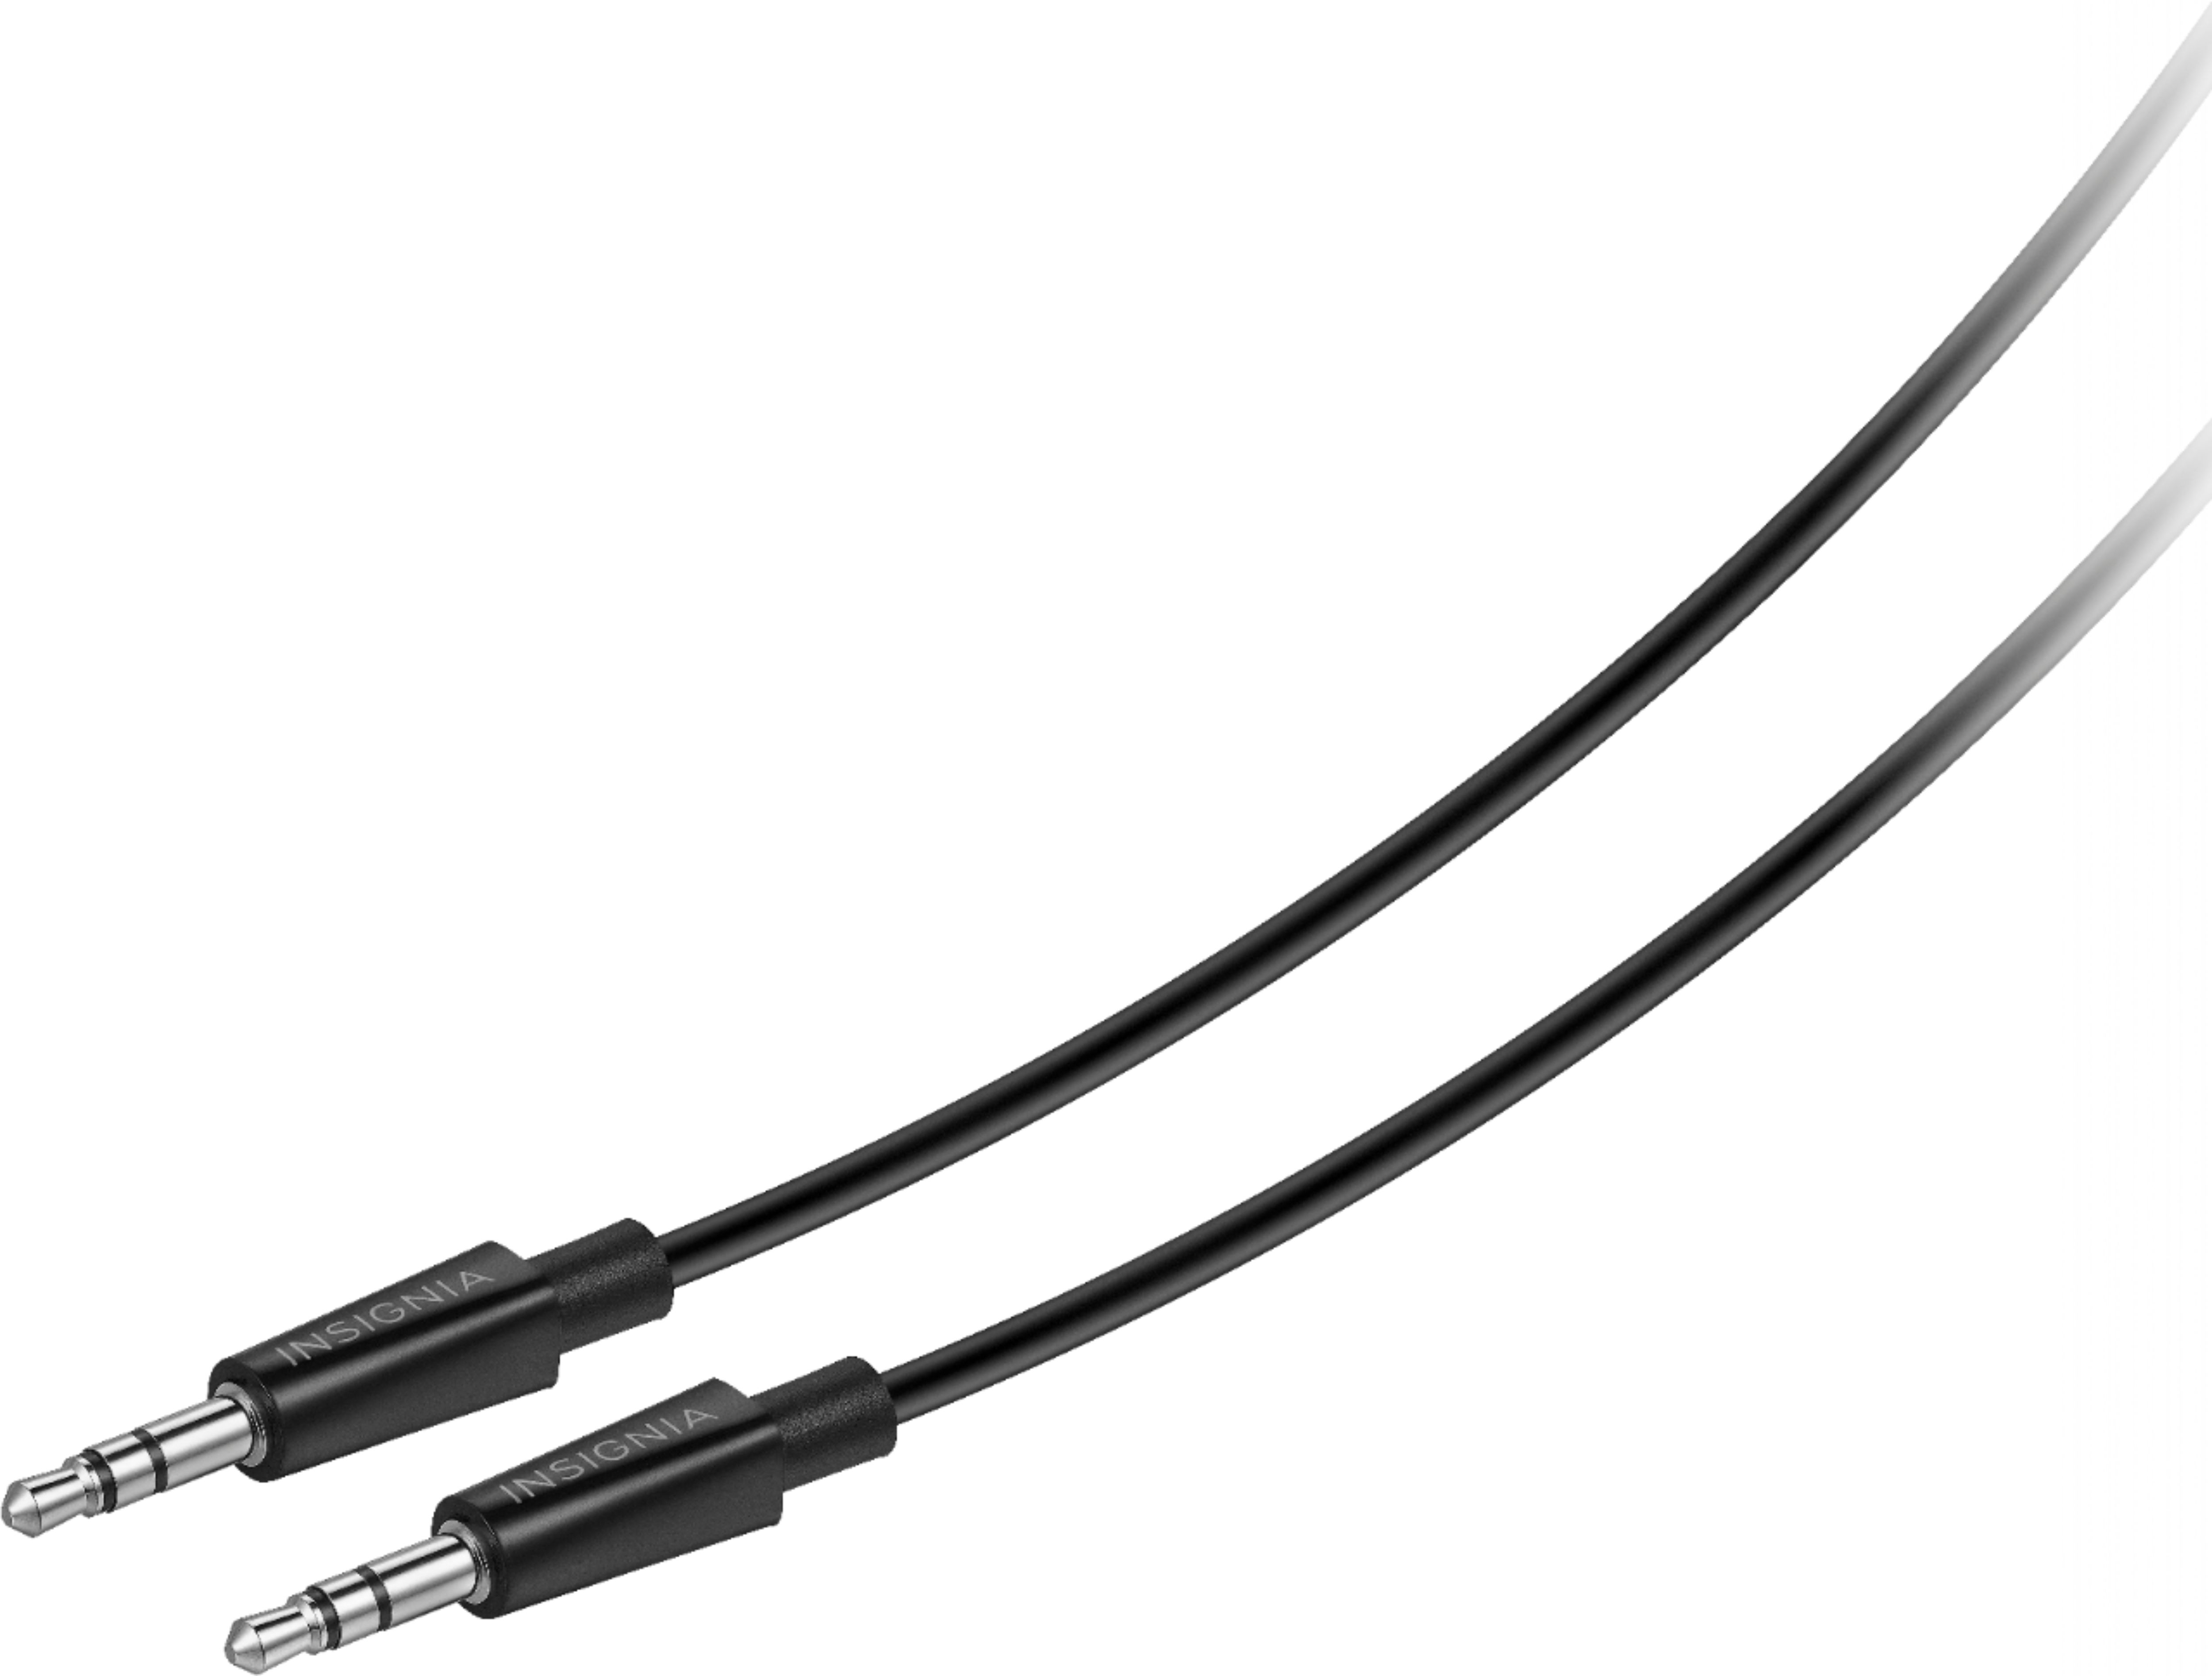  3.5mm Audio Cable